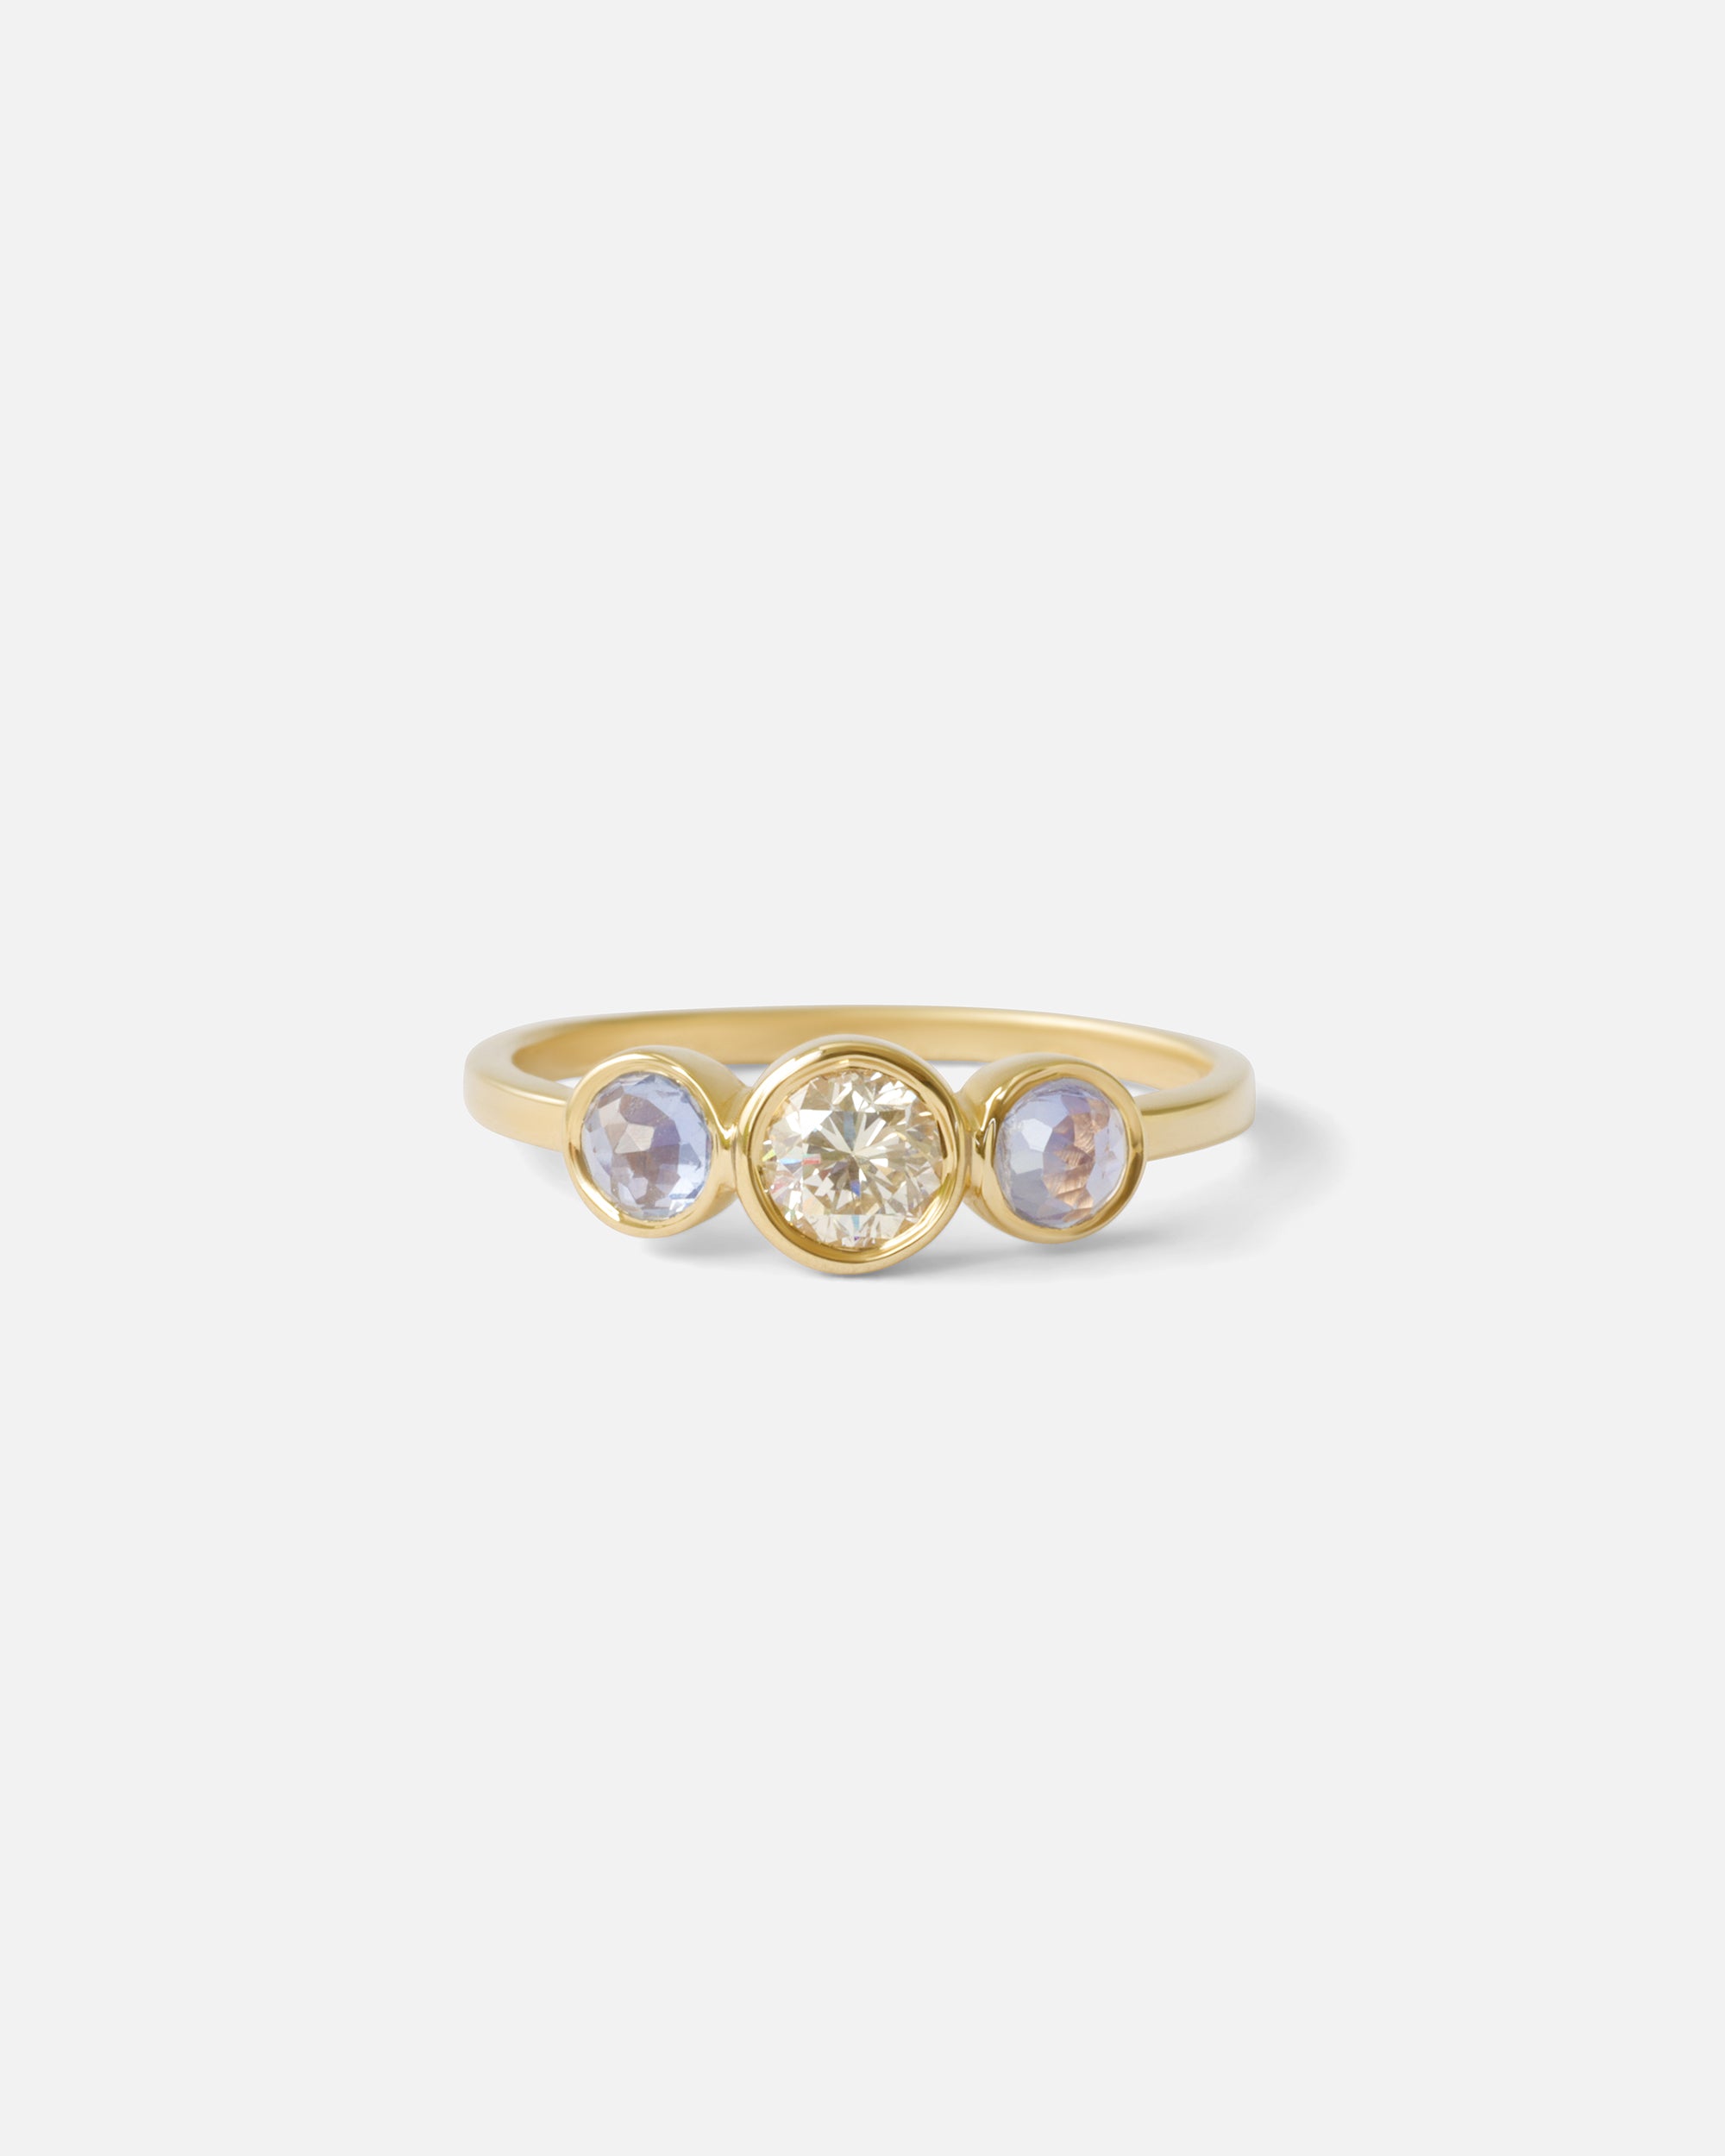 Diamond and Rose Cut Sapphire / 3 Stone Ring By Nishi